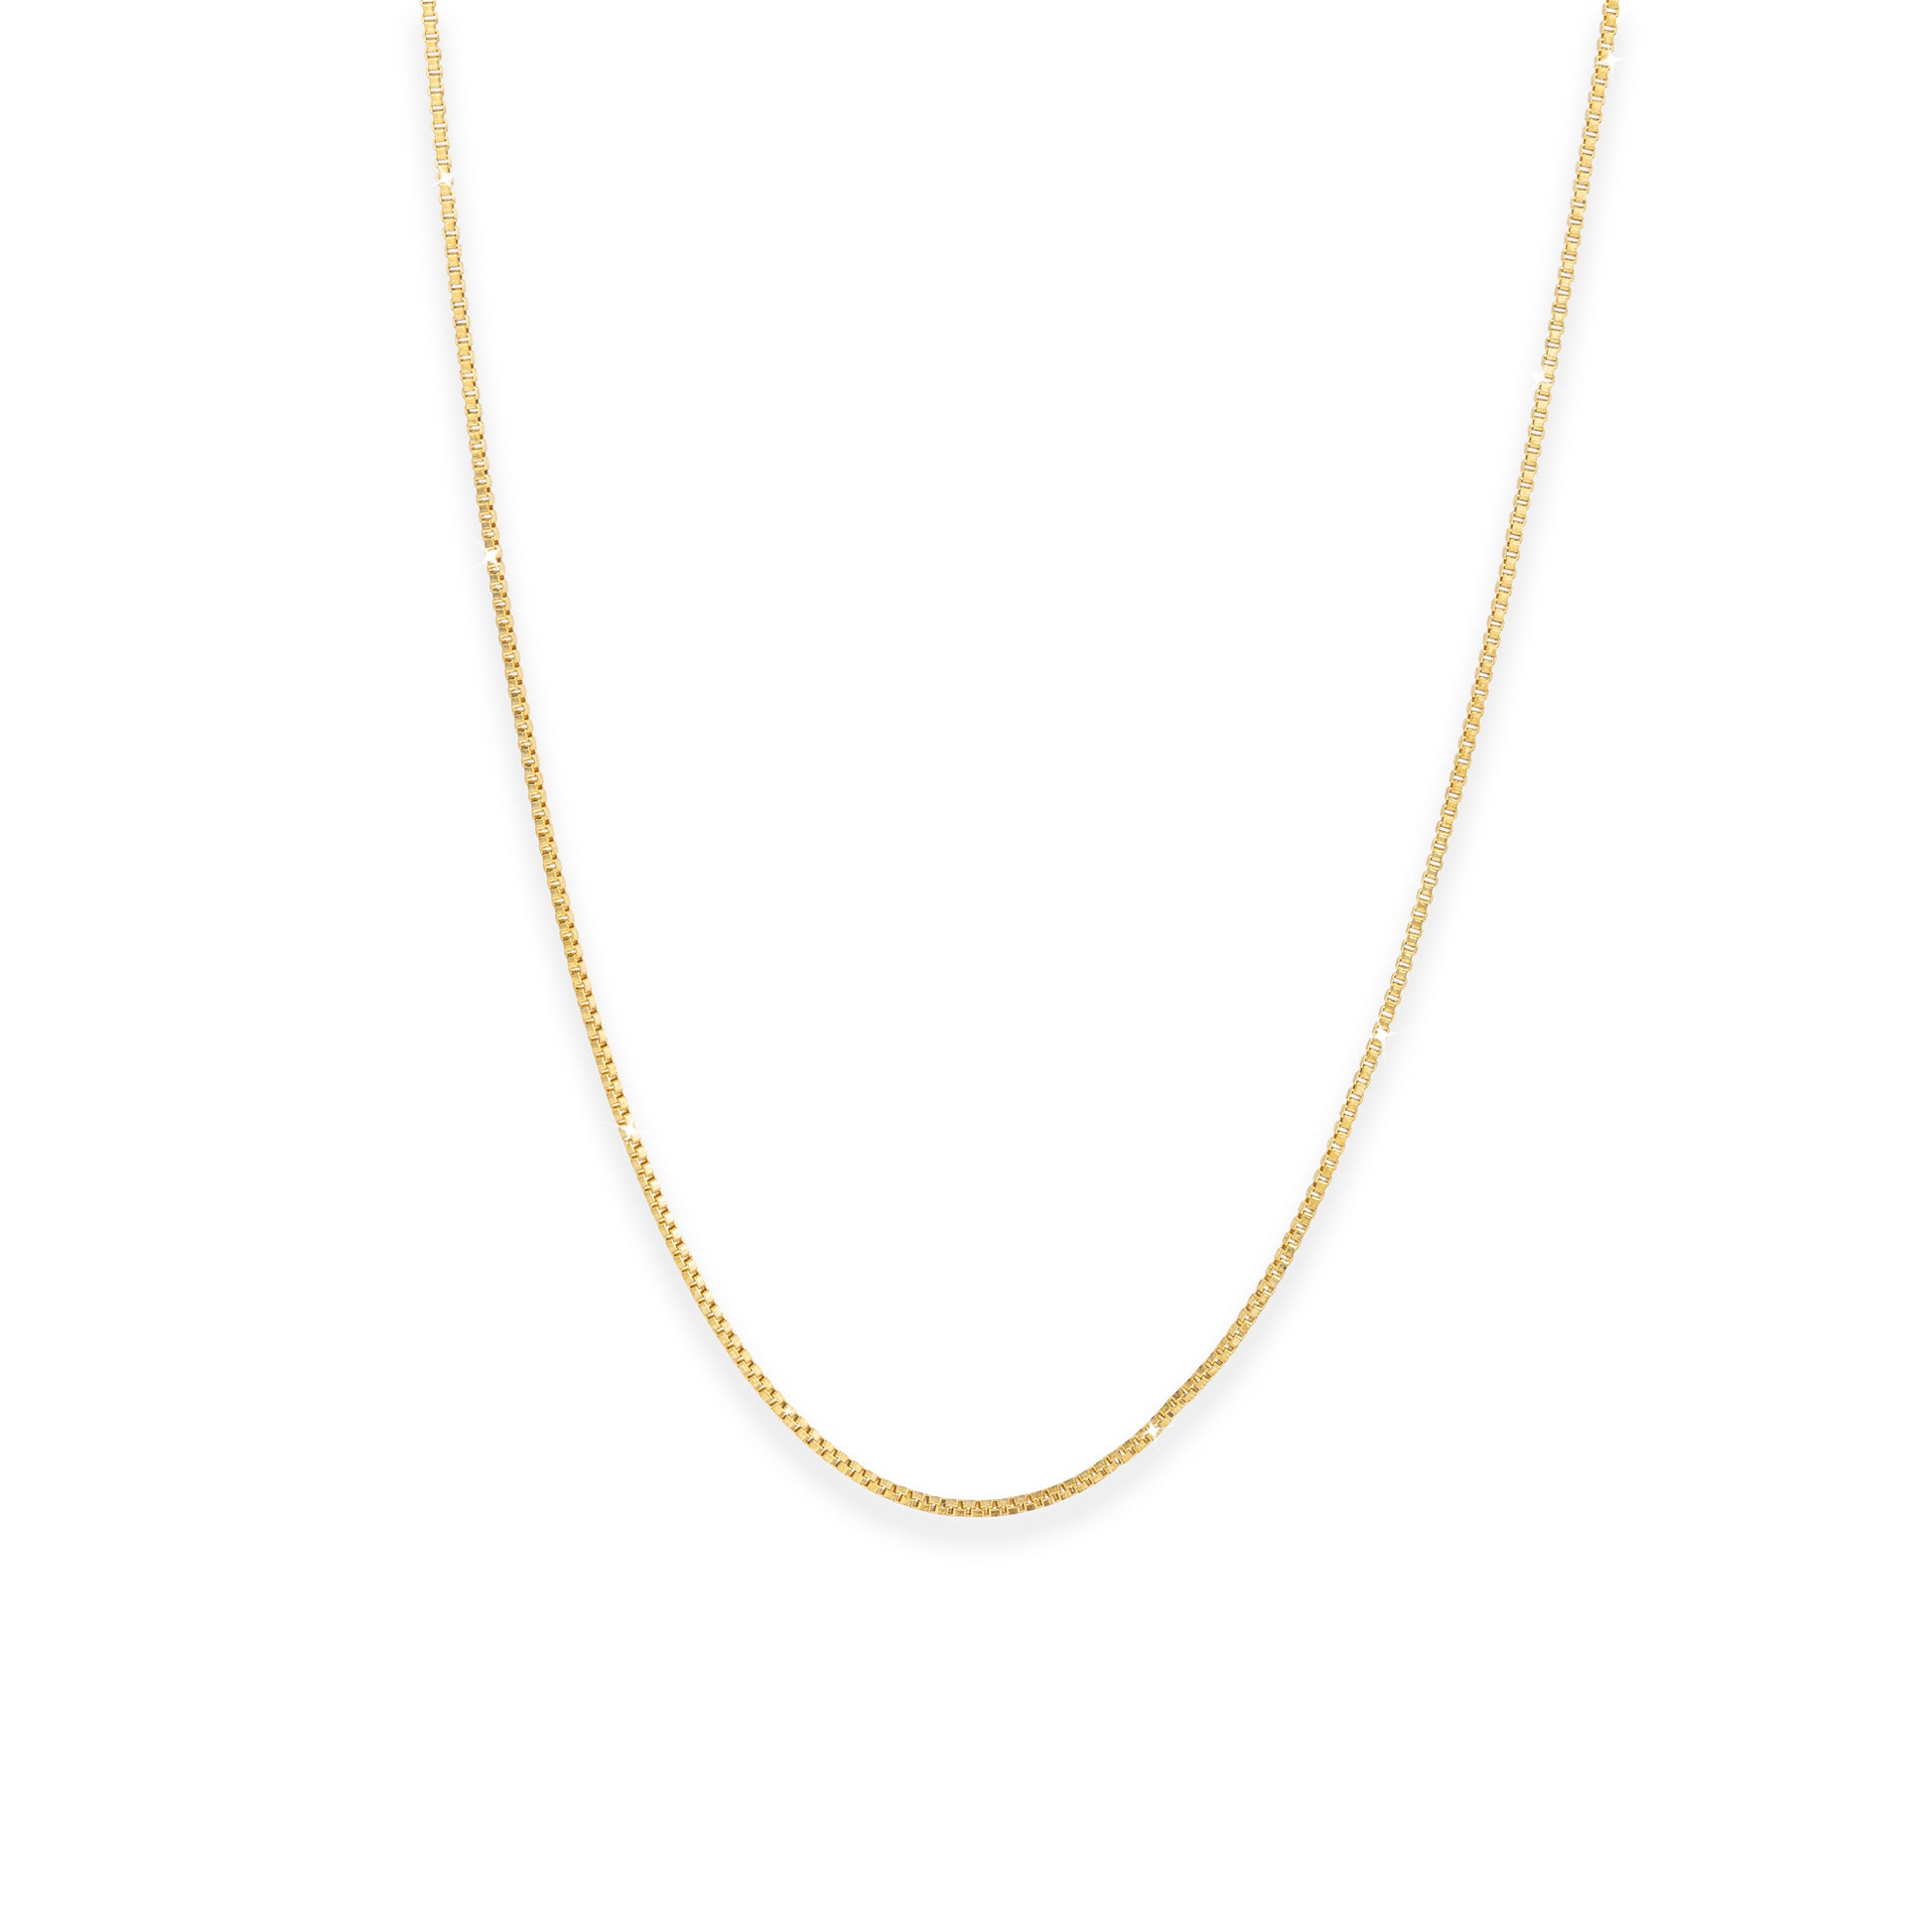 Gold box chain necklace for simple dainty jewelry